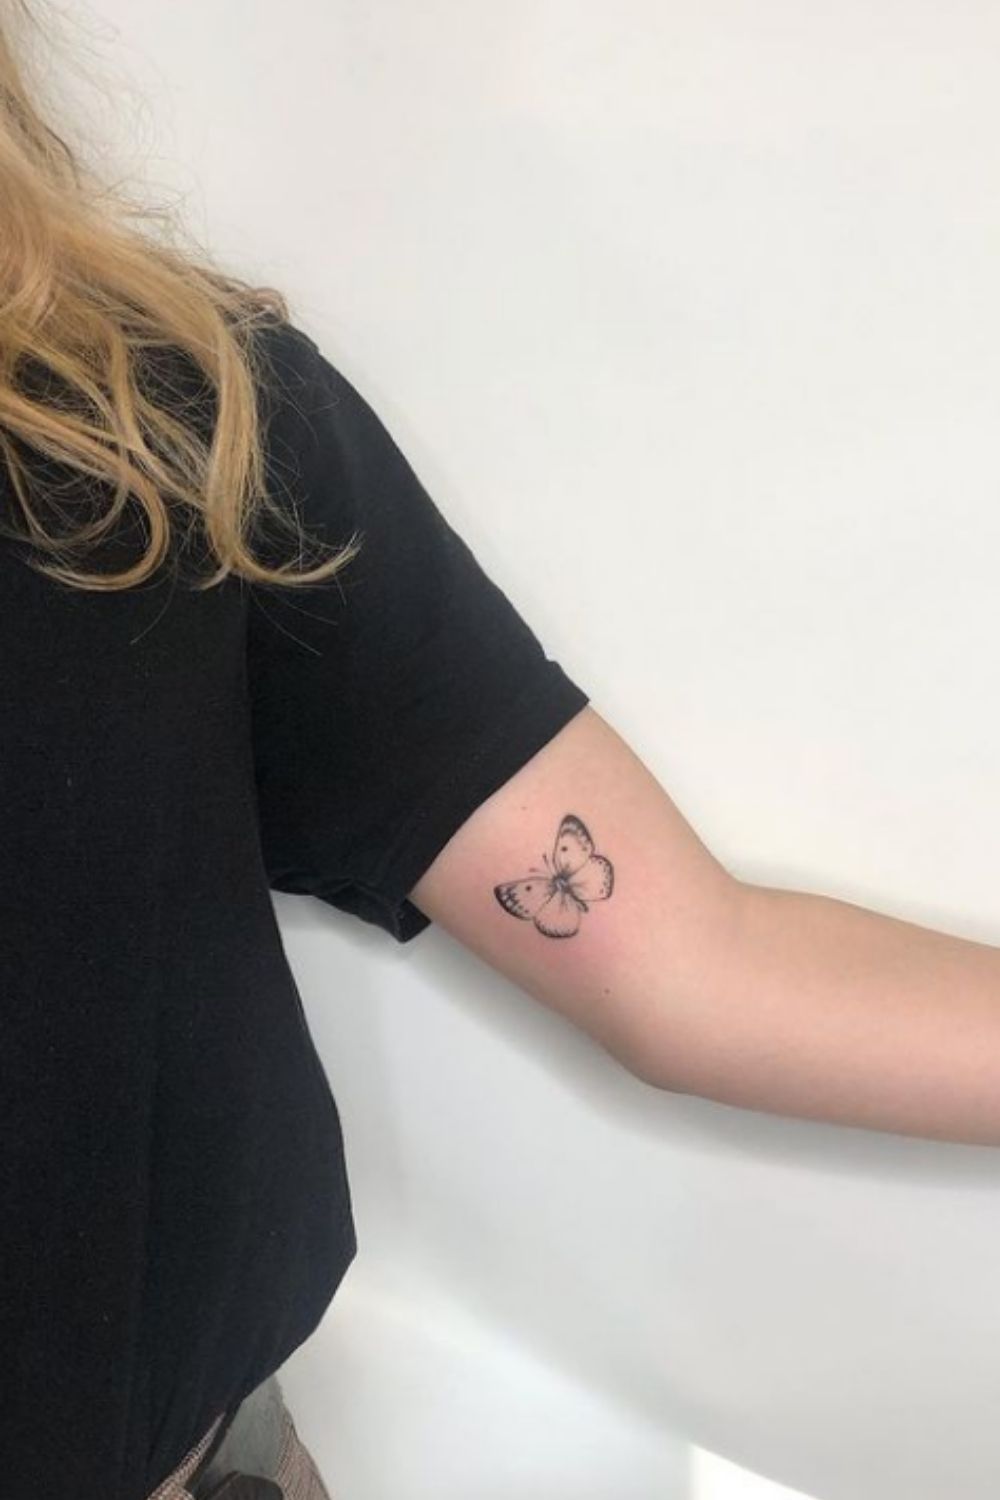 Small meaningful tattoos for women | The coolest tattoo of the year